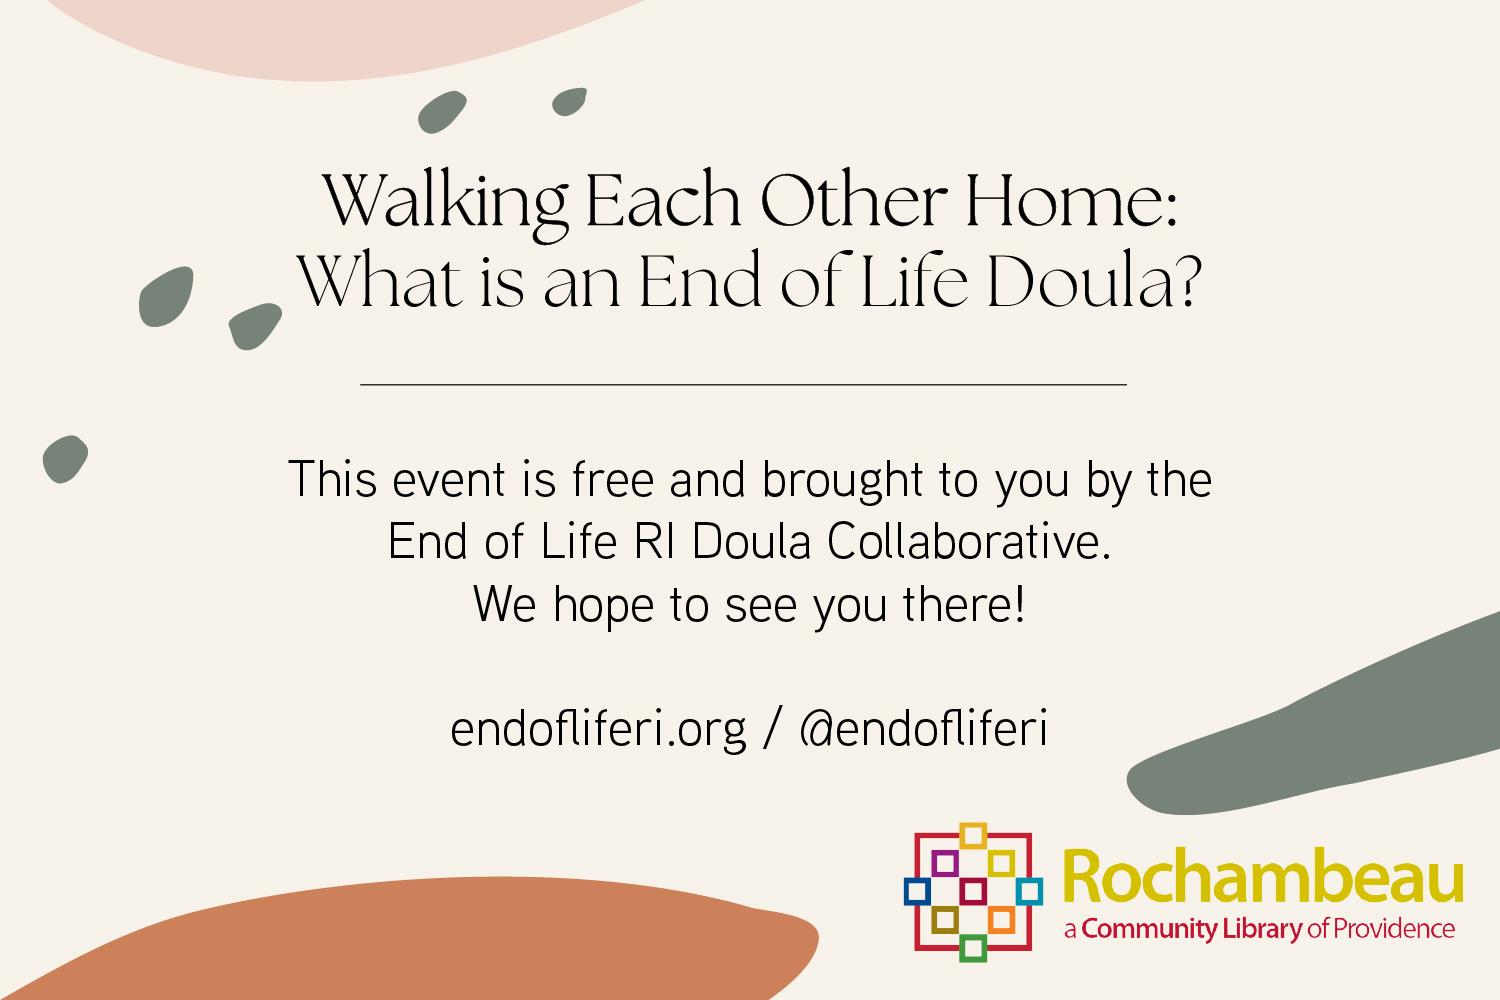 What is an End of Life Doula?